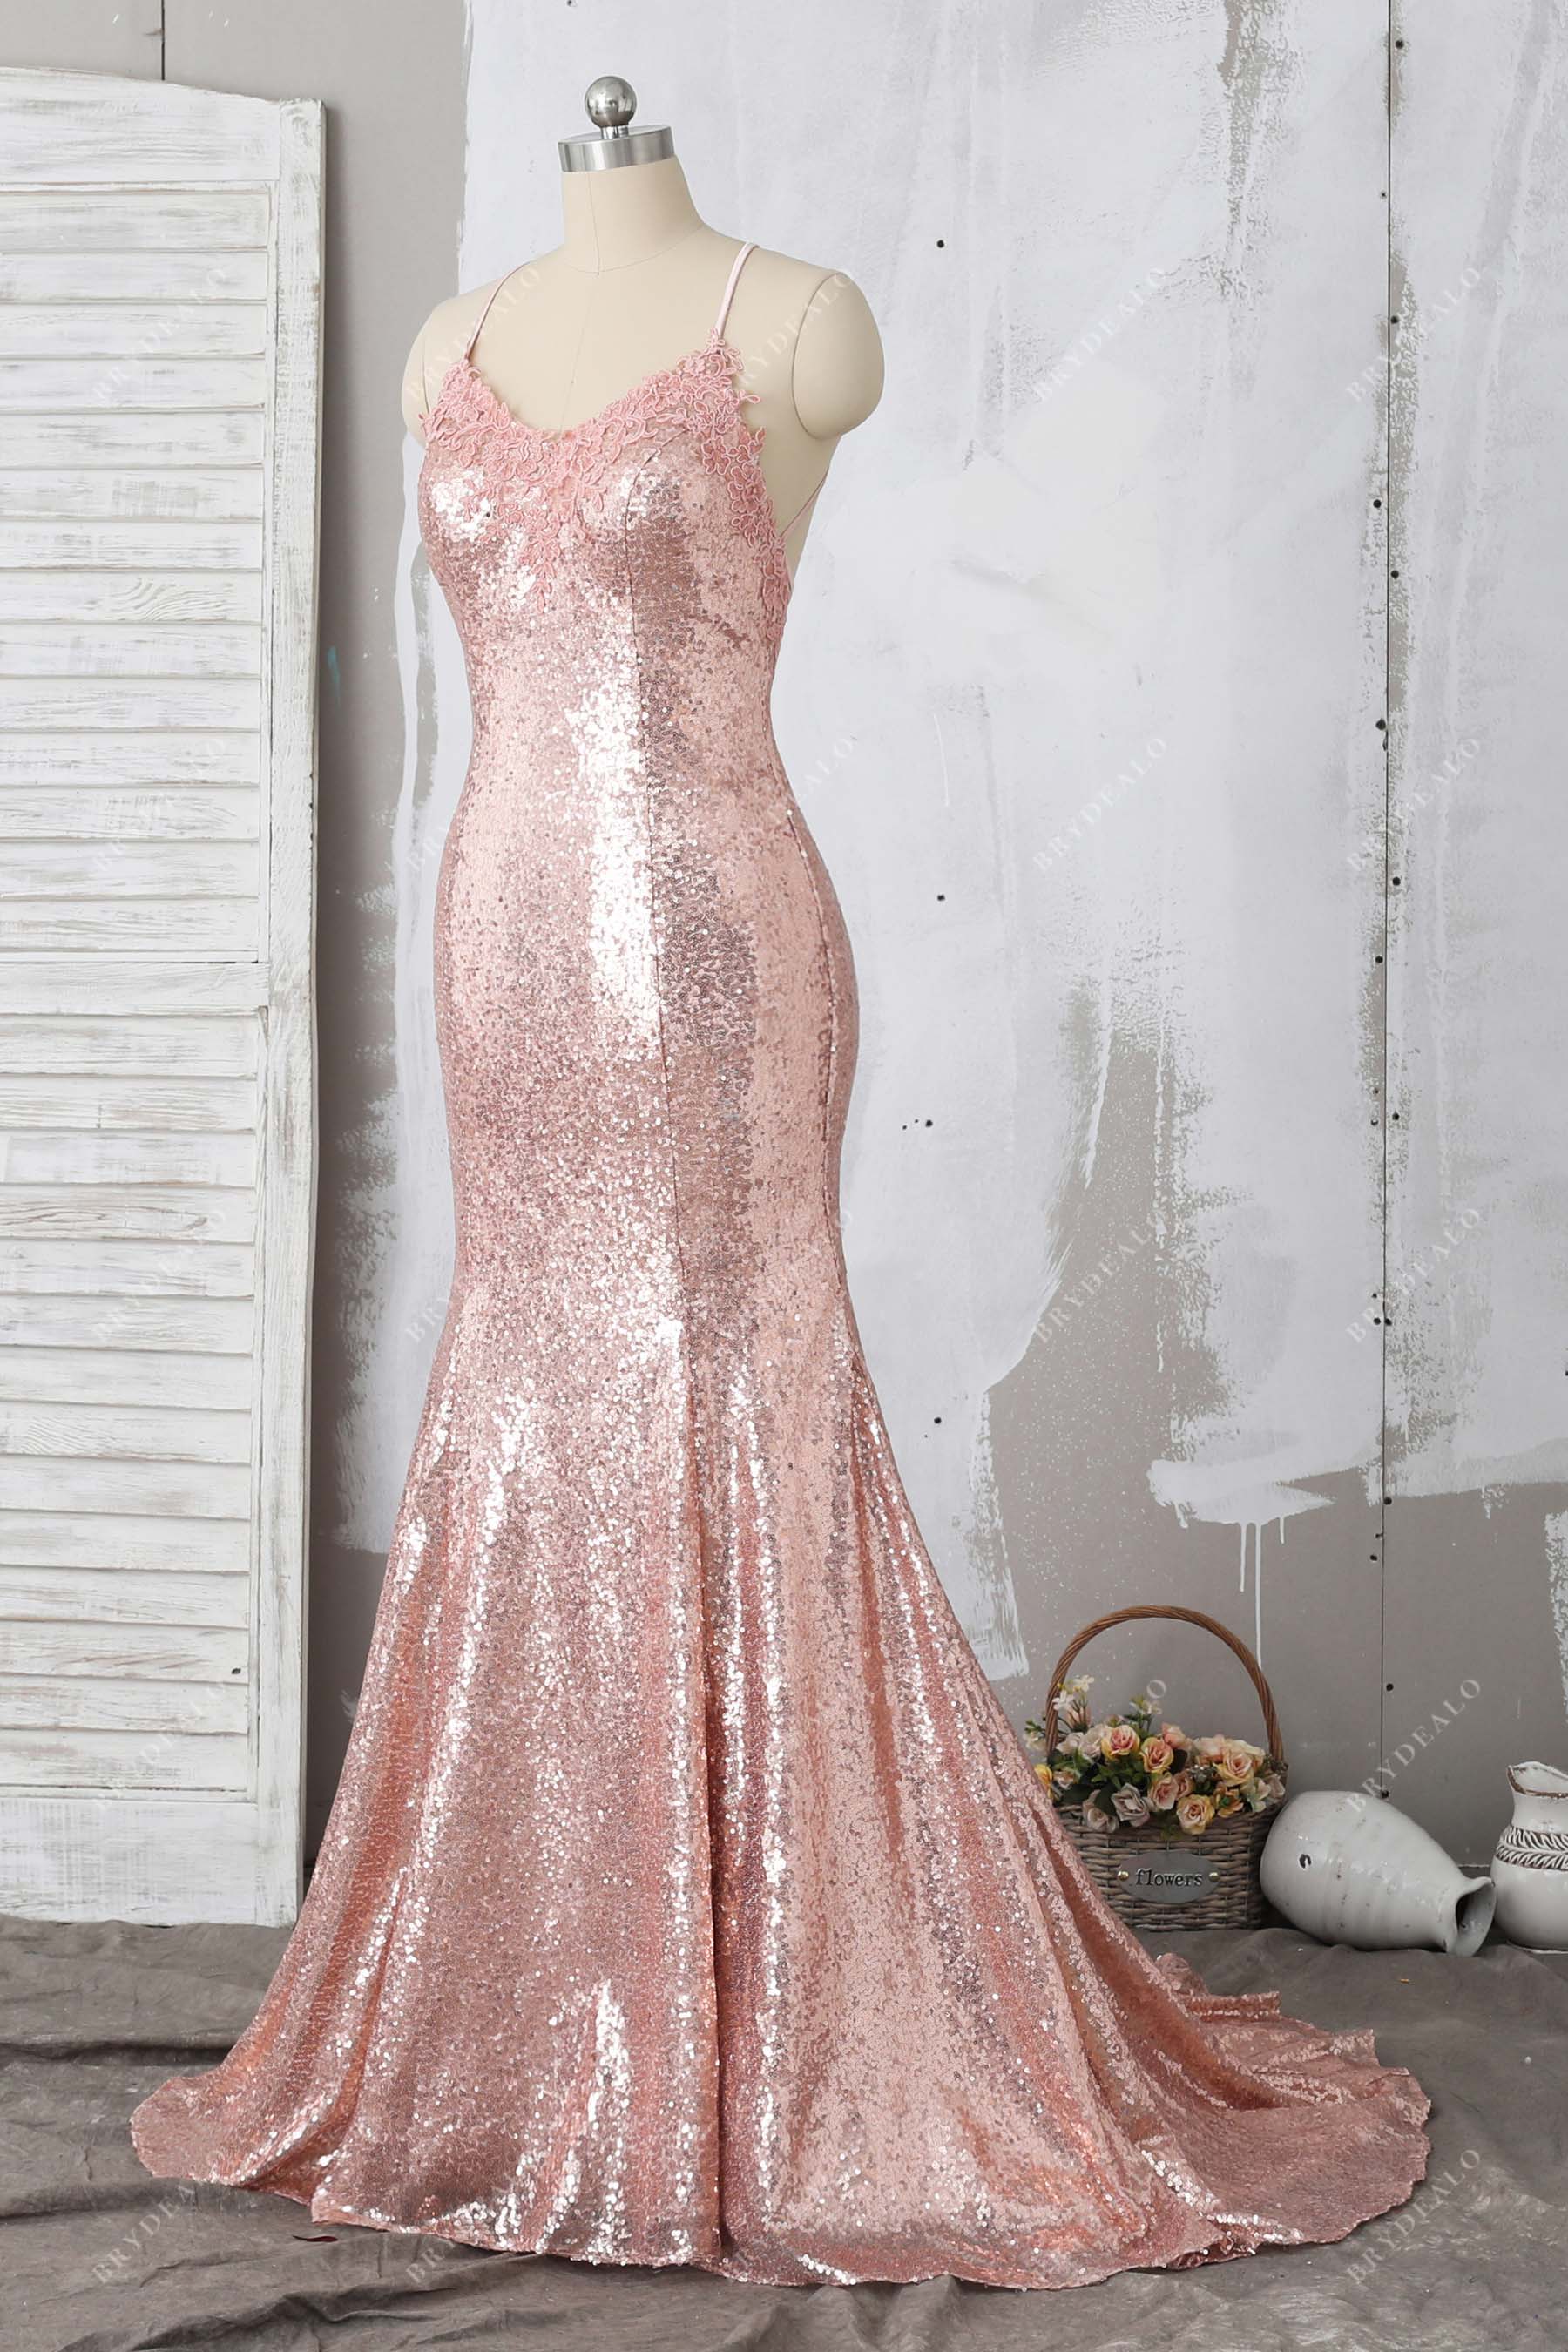 Elegant Lace Appliqued Rose Pink Sequin Mermaid Prom Gown for wholesale